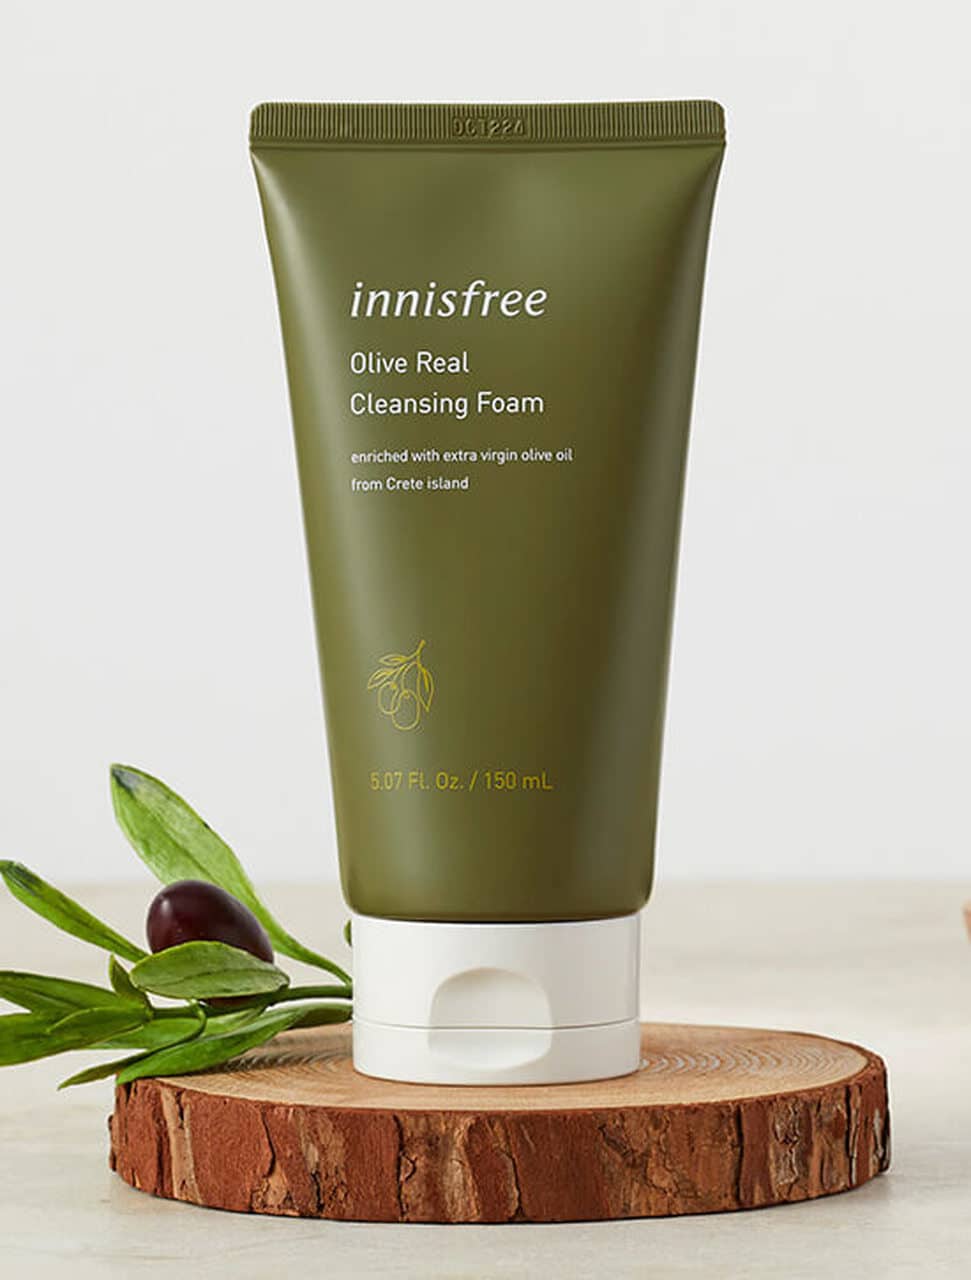 Olive Real Cleansing Foam 2019 550x725 Innisfree 44111.1571681919